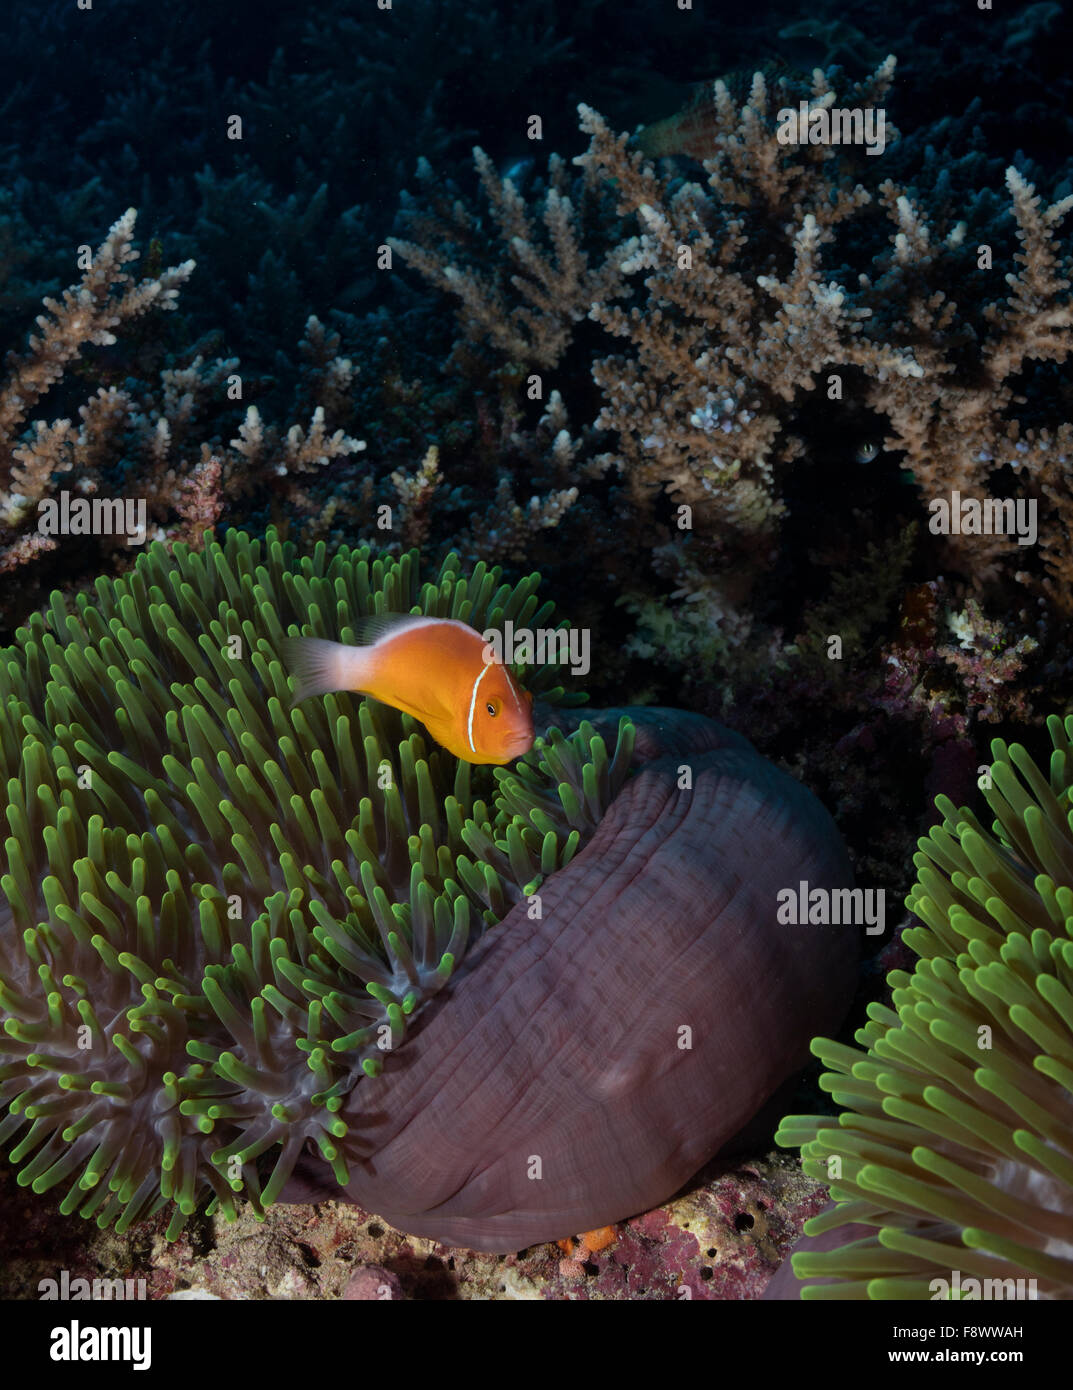 Pink anemonefish with Magnificent sea anemone. Stock Photo